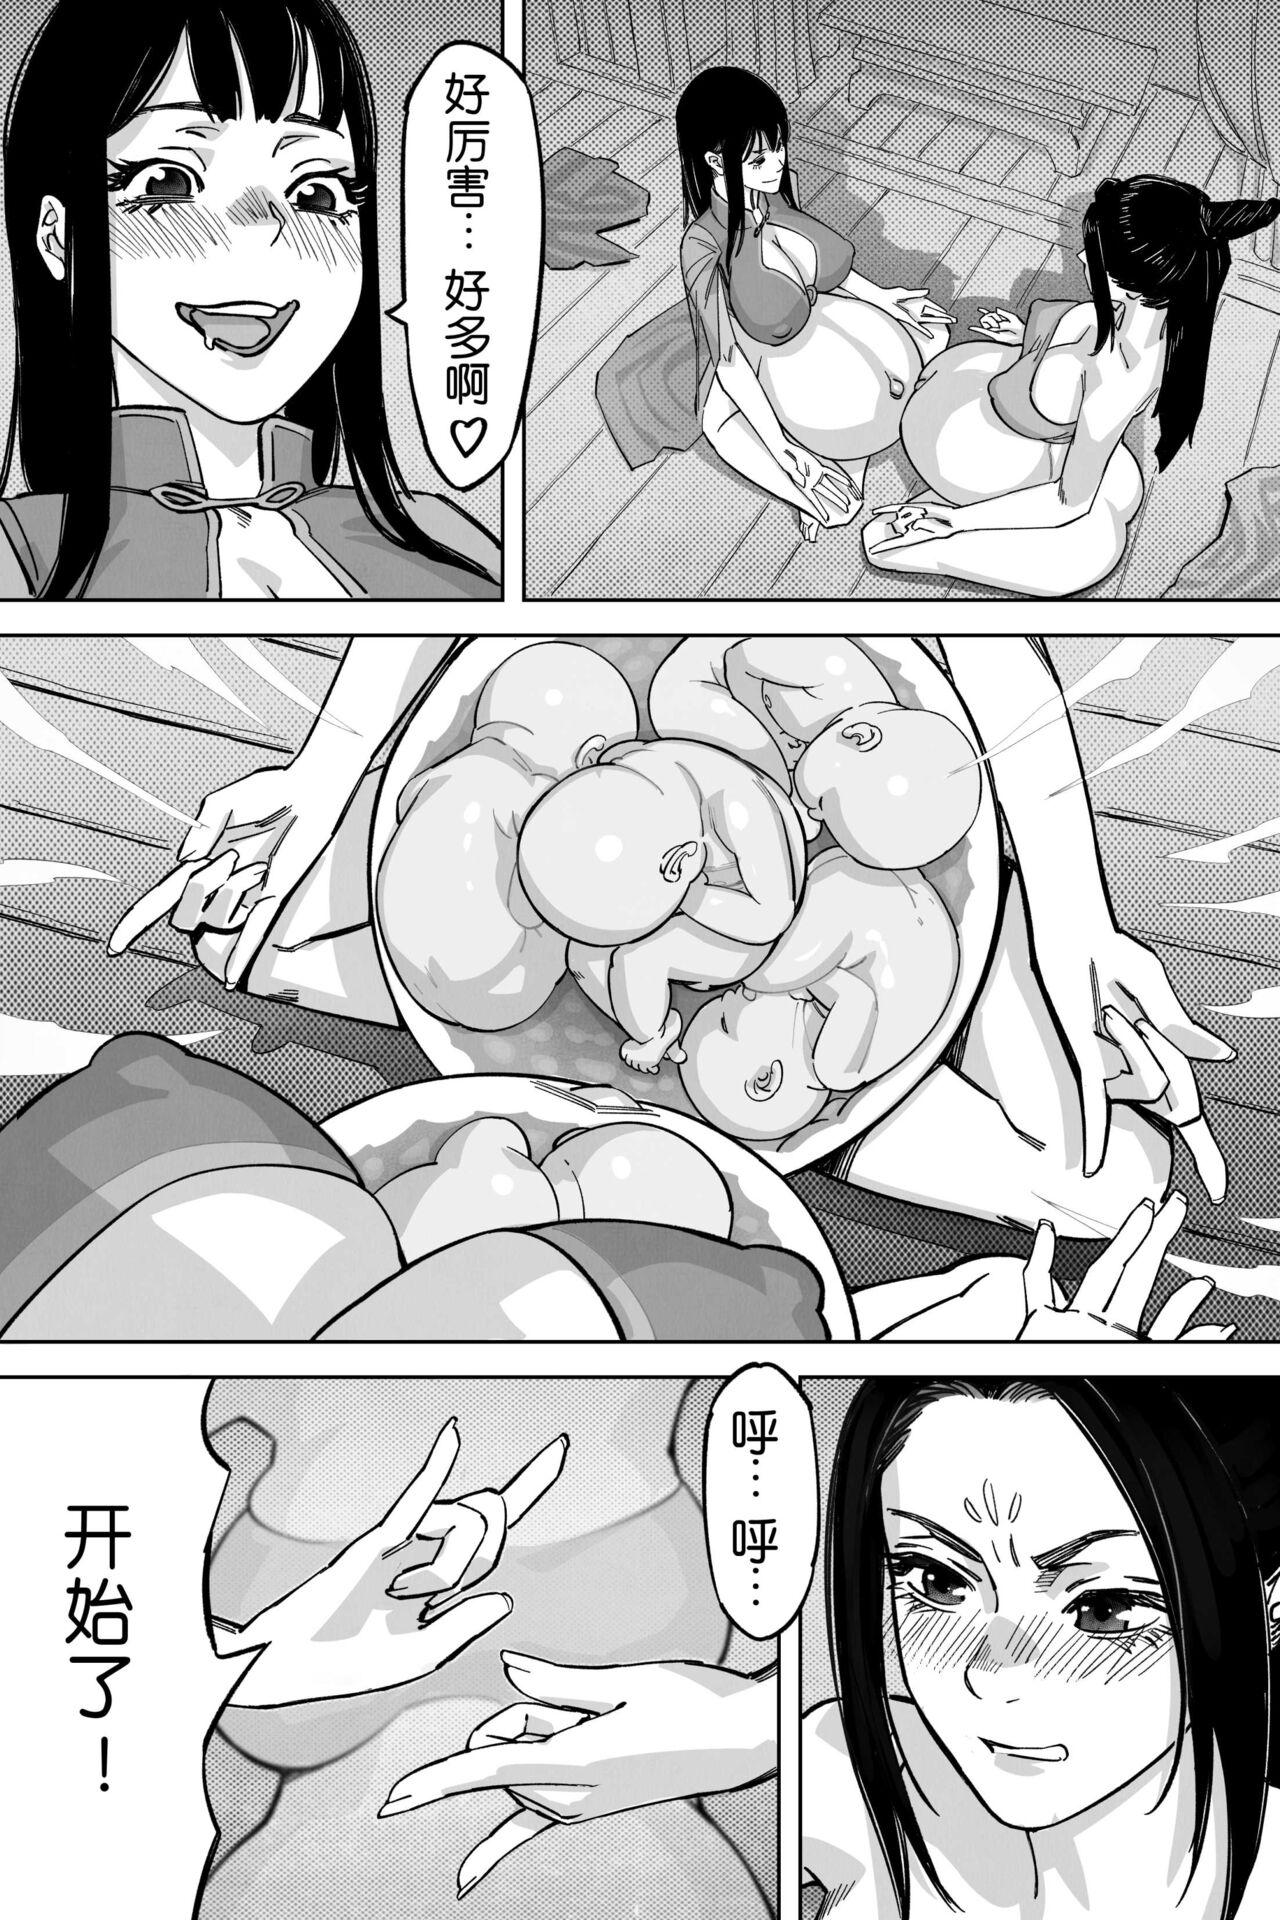 Goldenshower 仙胎劫2 Softcore - Page 6